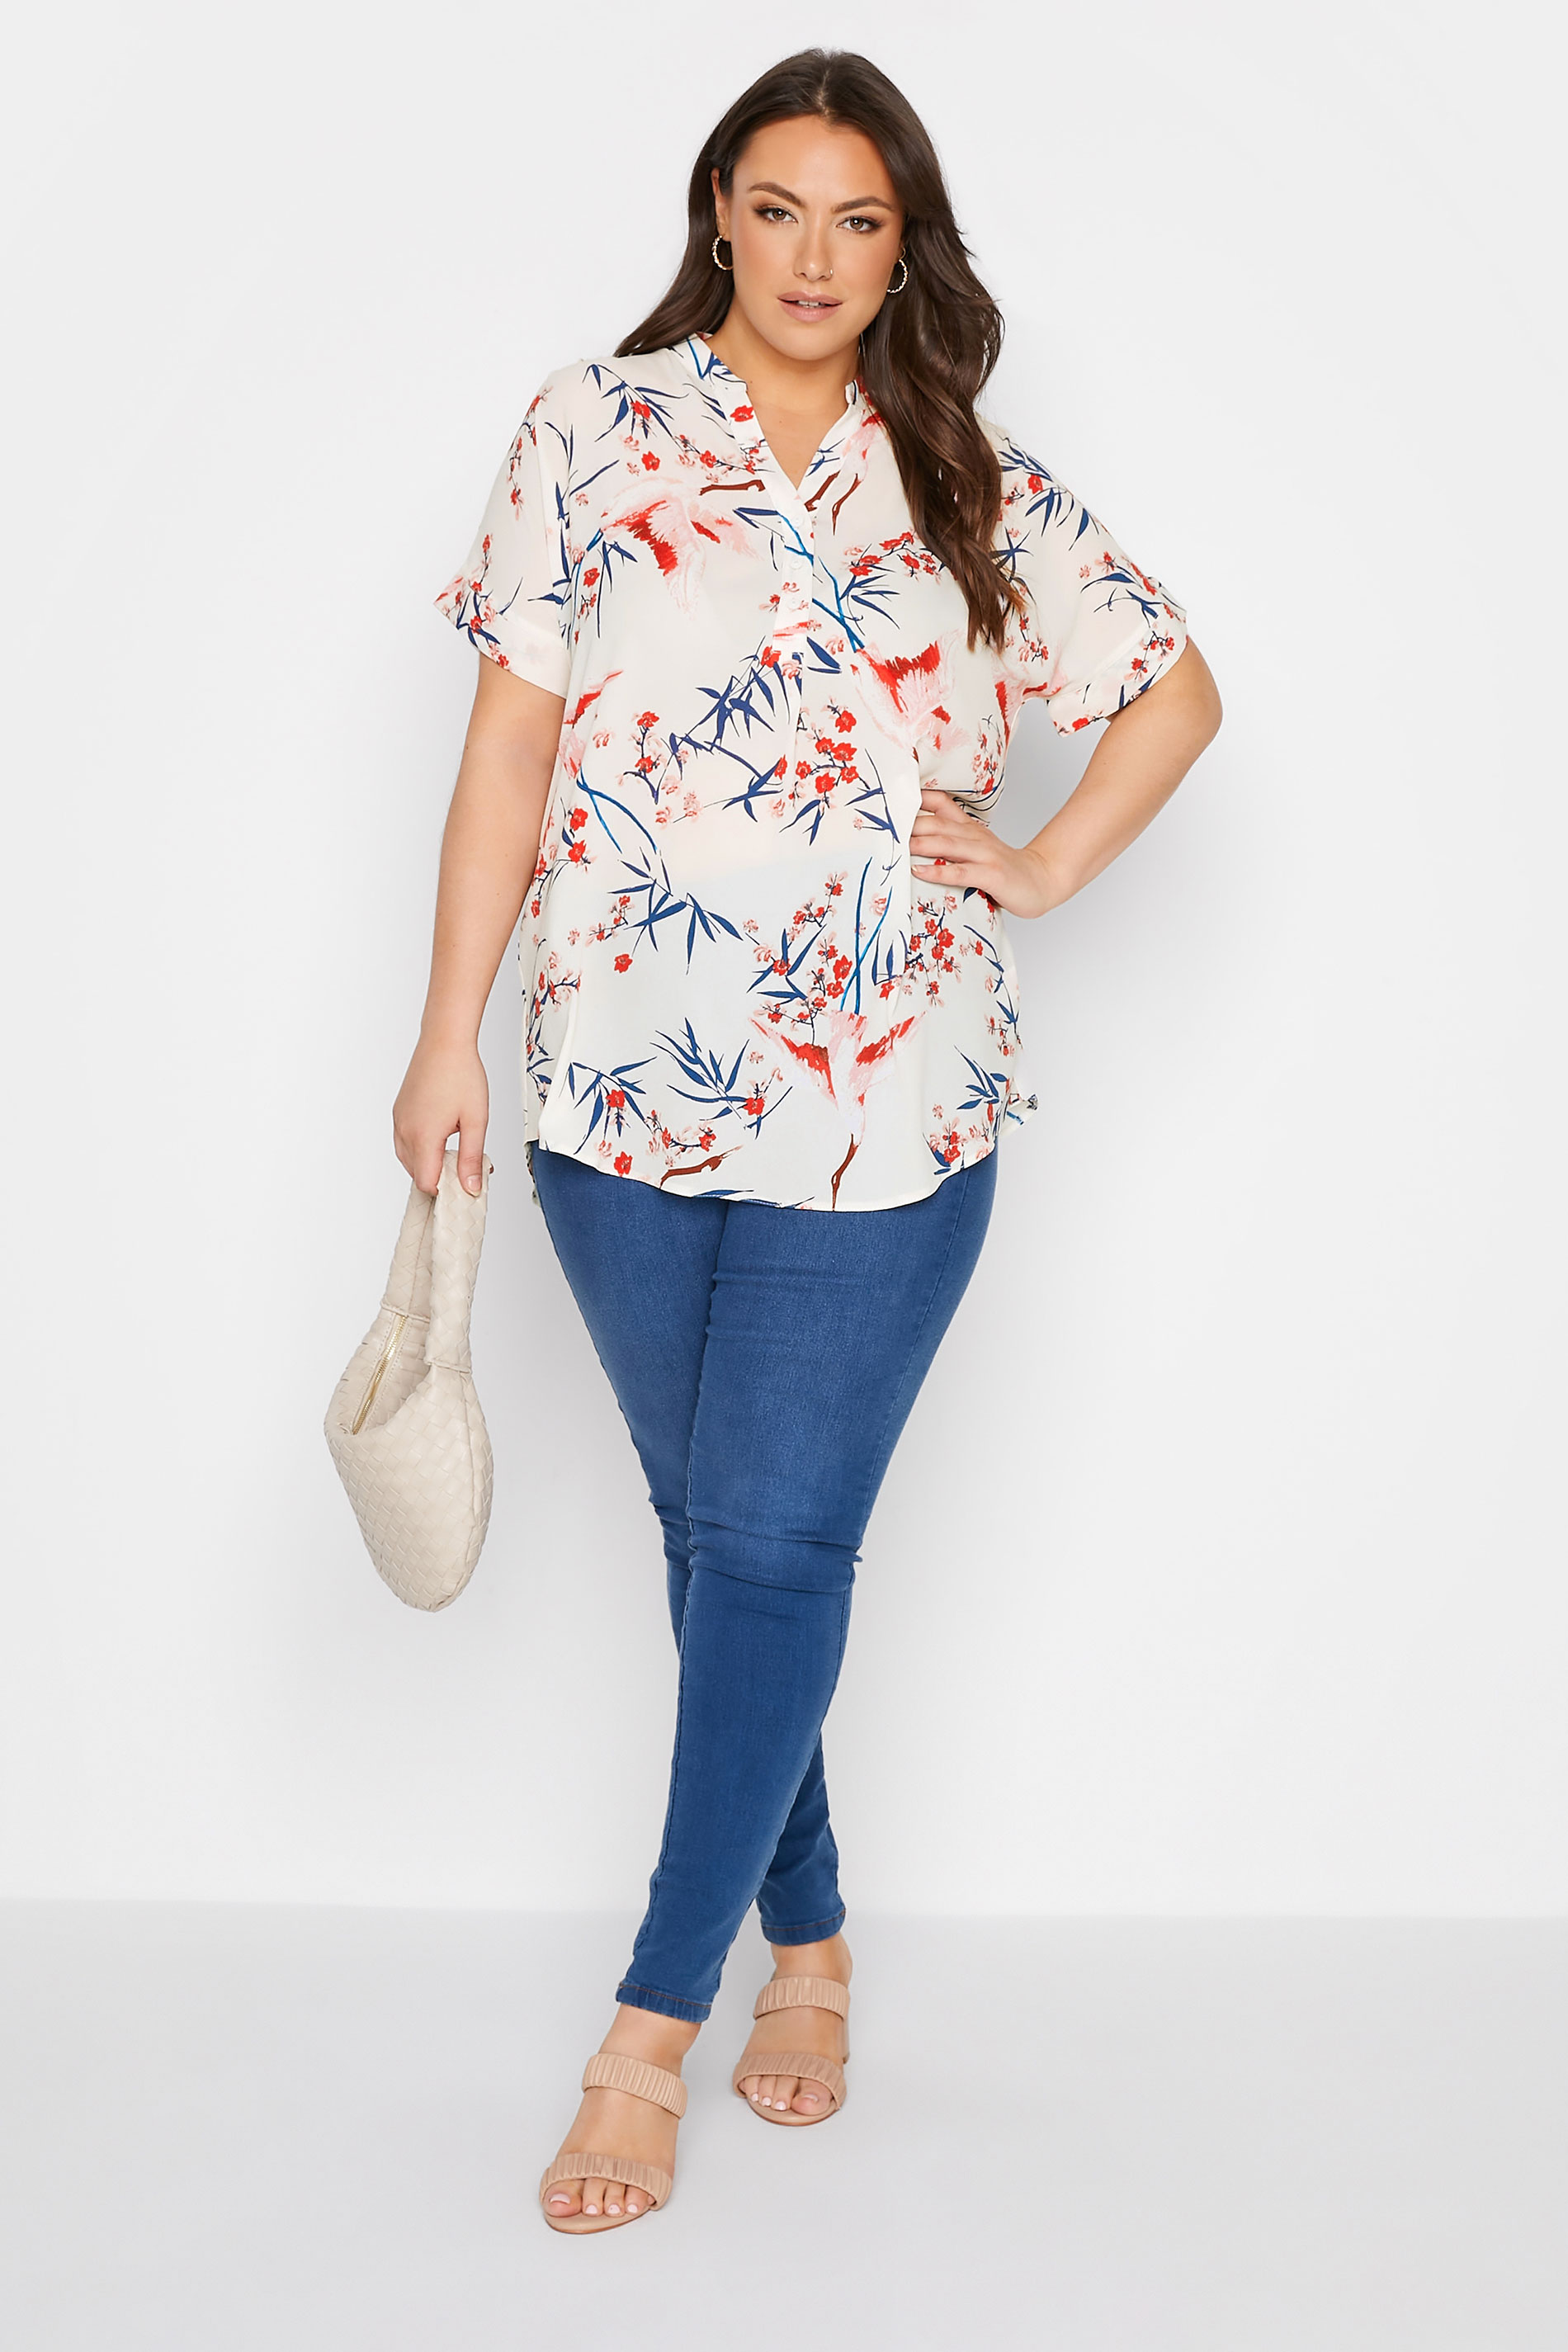 Grande taille  Tops Grande taille  Blouses & Chemisiers | Blouse Blanche Floral Manches Courtes Boutonnée - FU31703